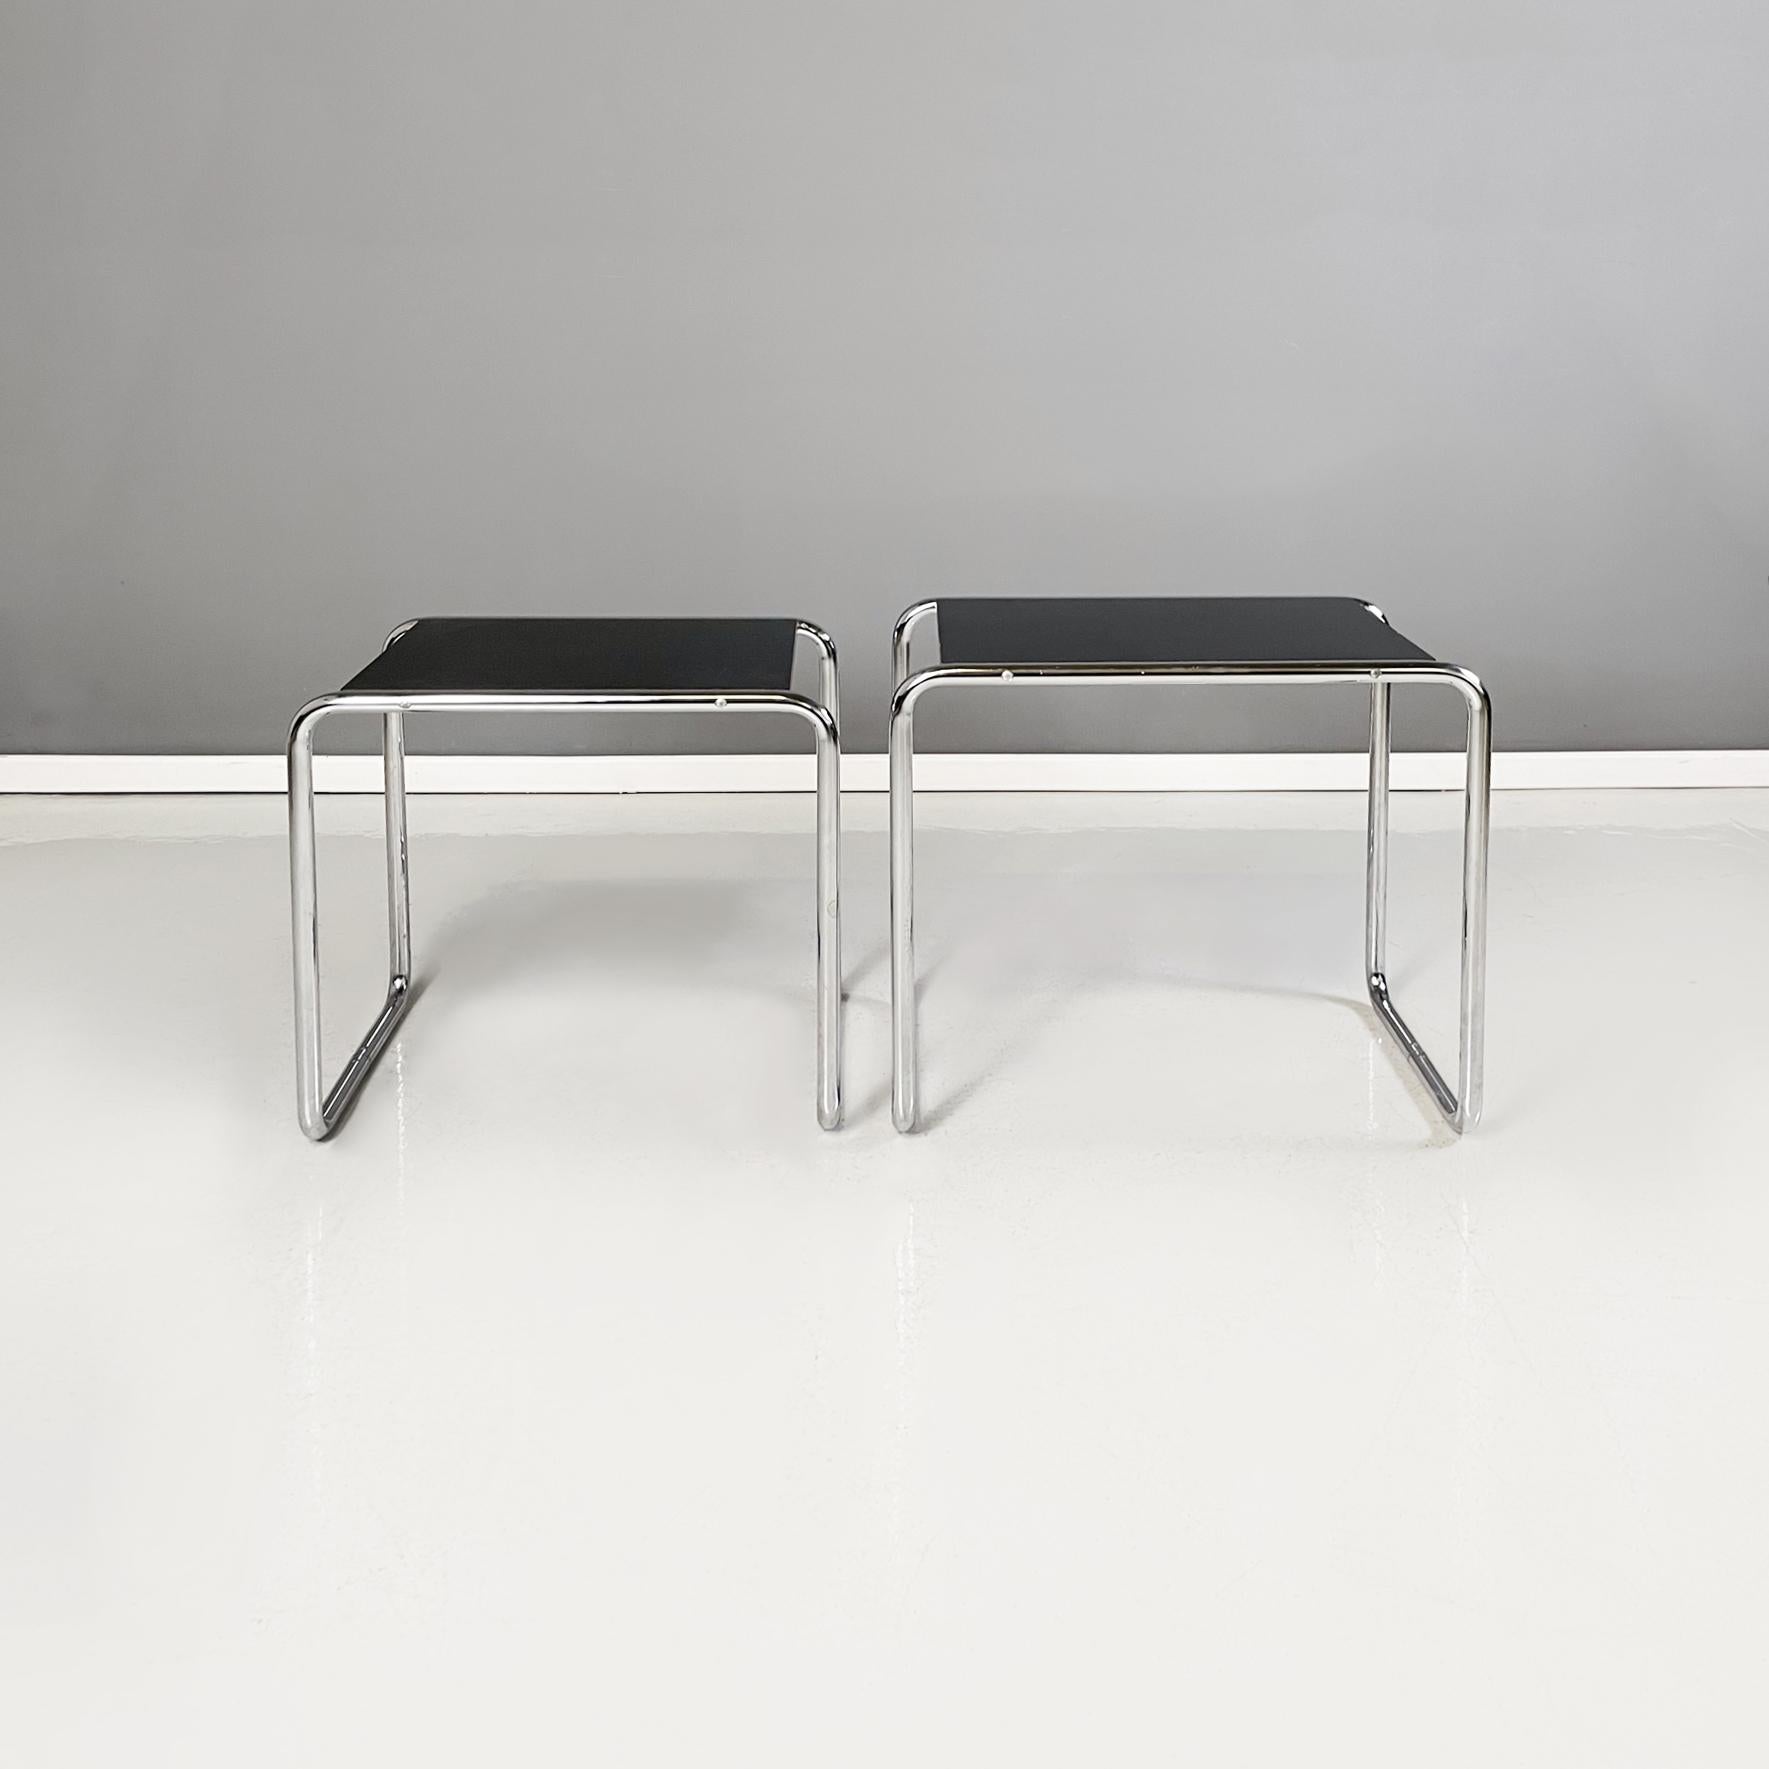 Modern German Black Wood and Steel Coffee Tables by Arnold Bauhaus Collection, 1980s For Sale